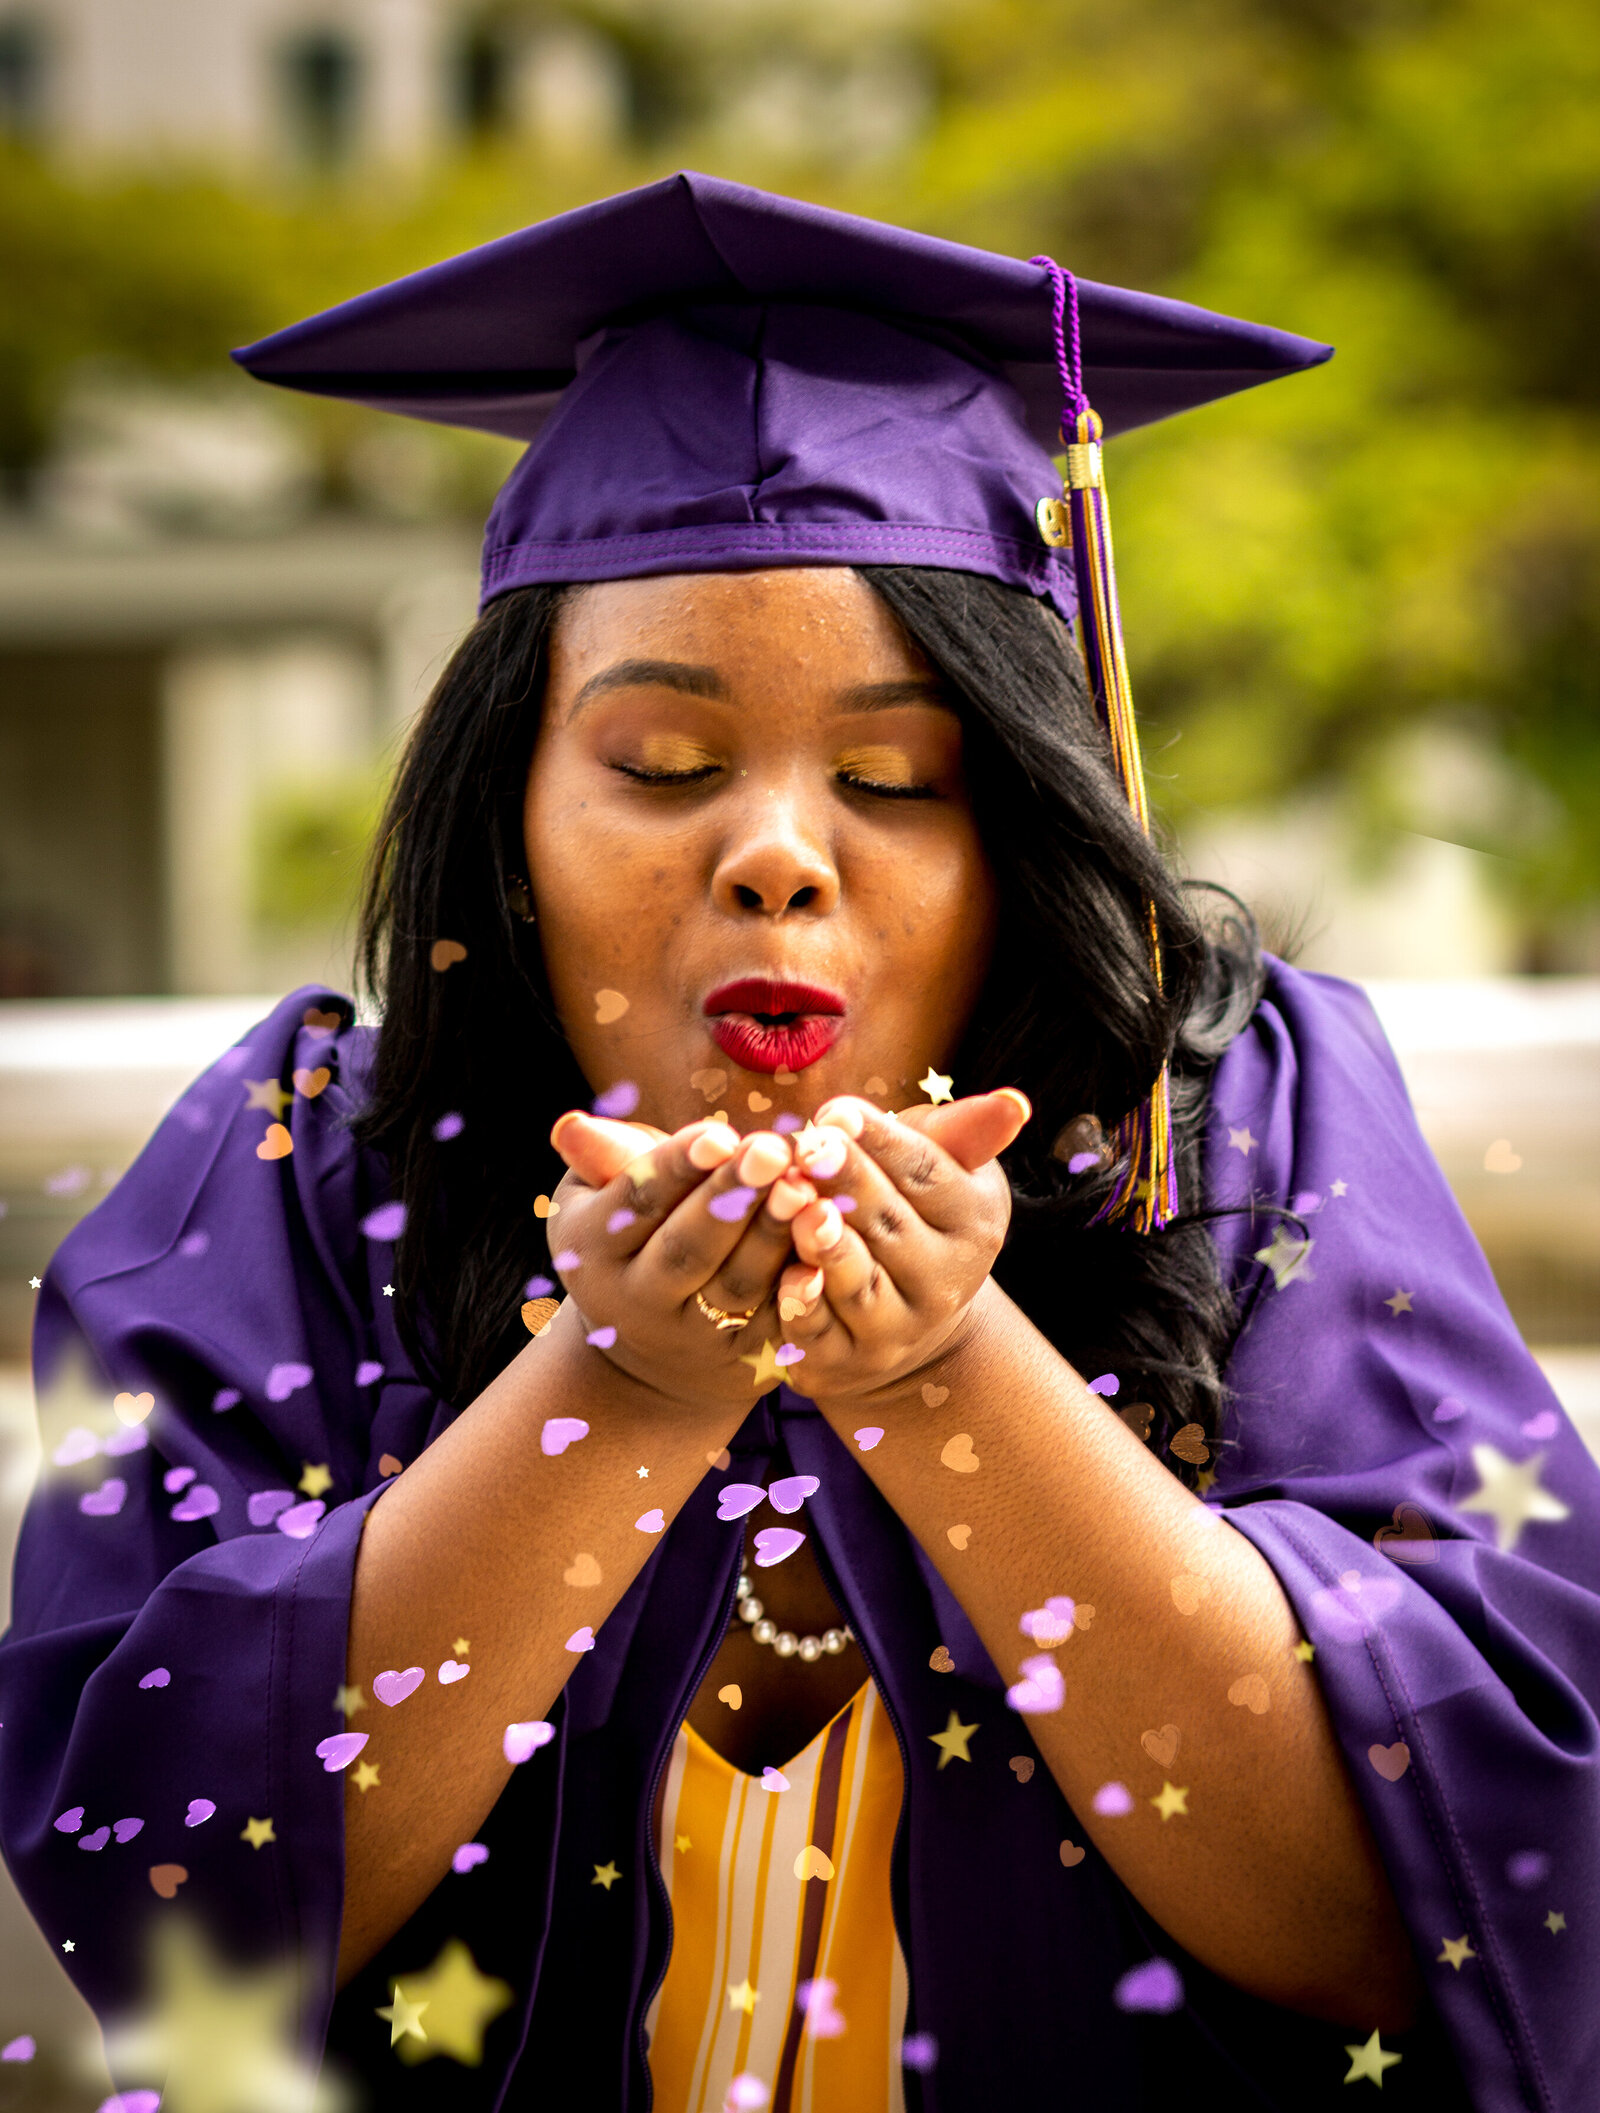 girl in purple graduation cap and gown blowing purple and gold heart glitter